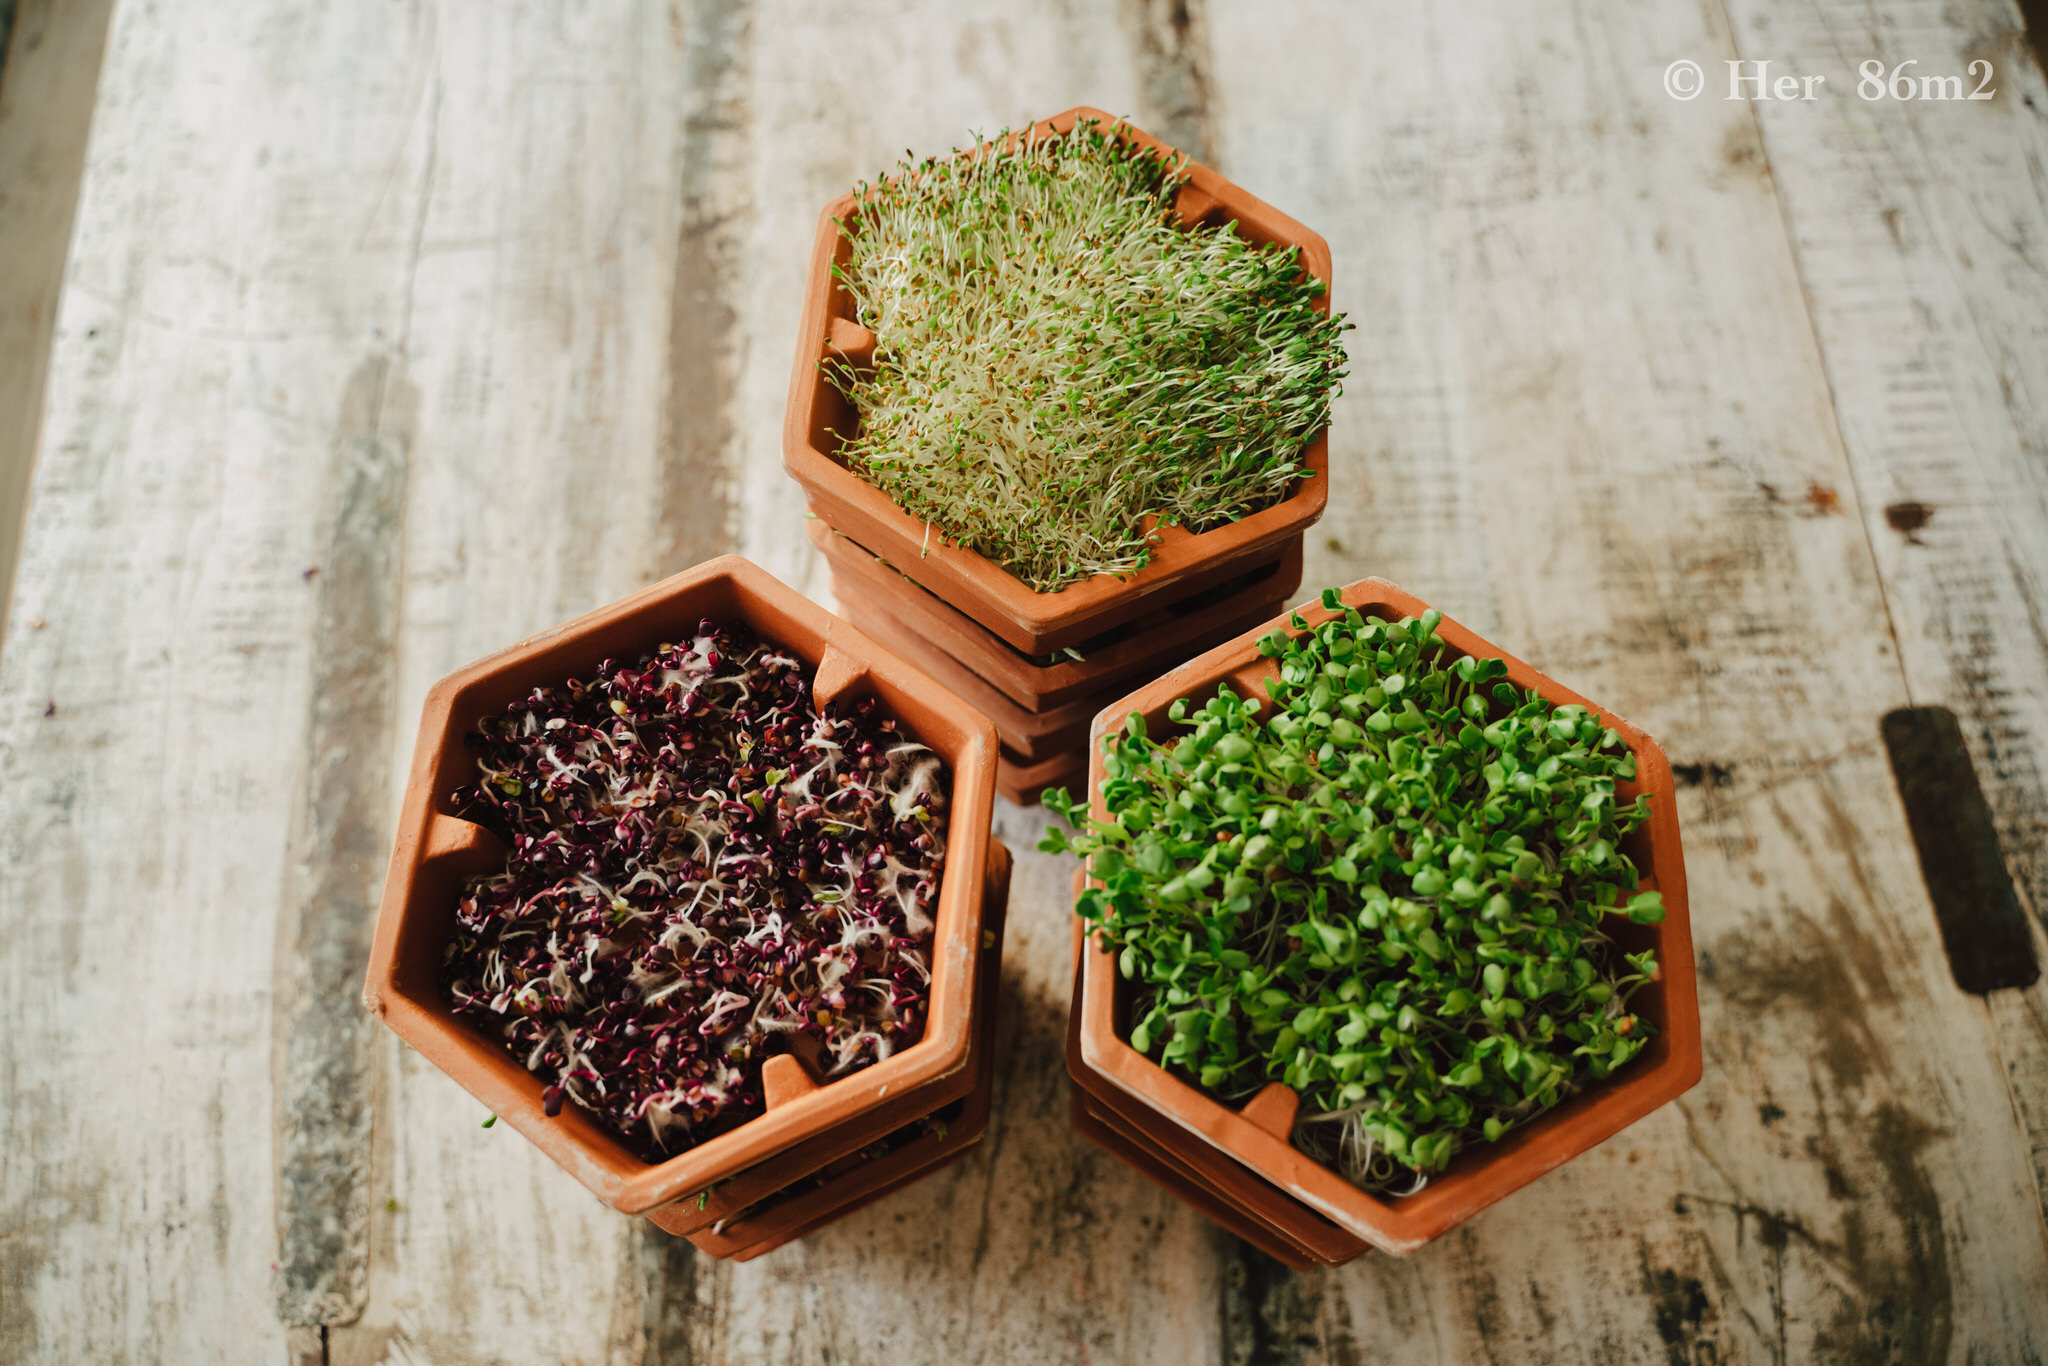 Grow Vegetables Indoors - Microgreens & Sprouts - From Seed to Harvest 4.JPG